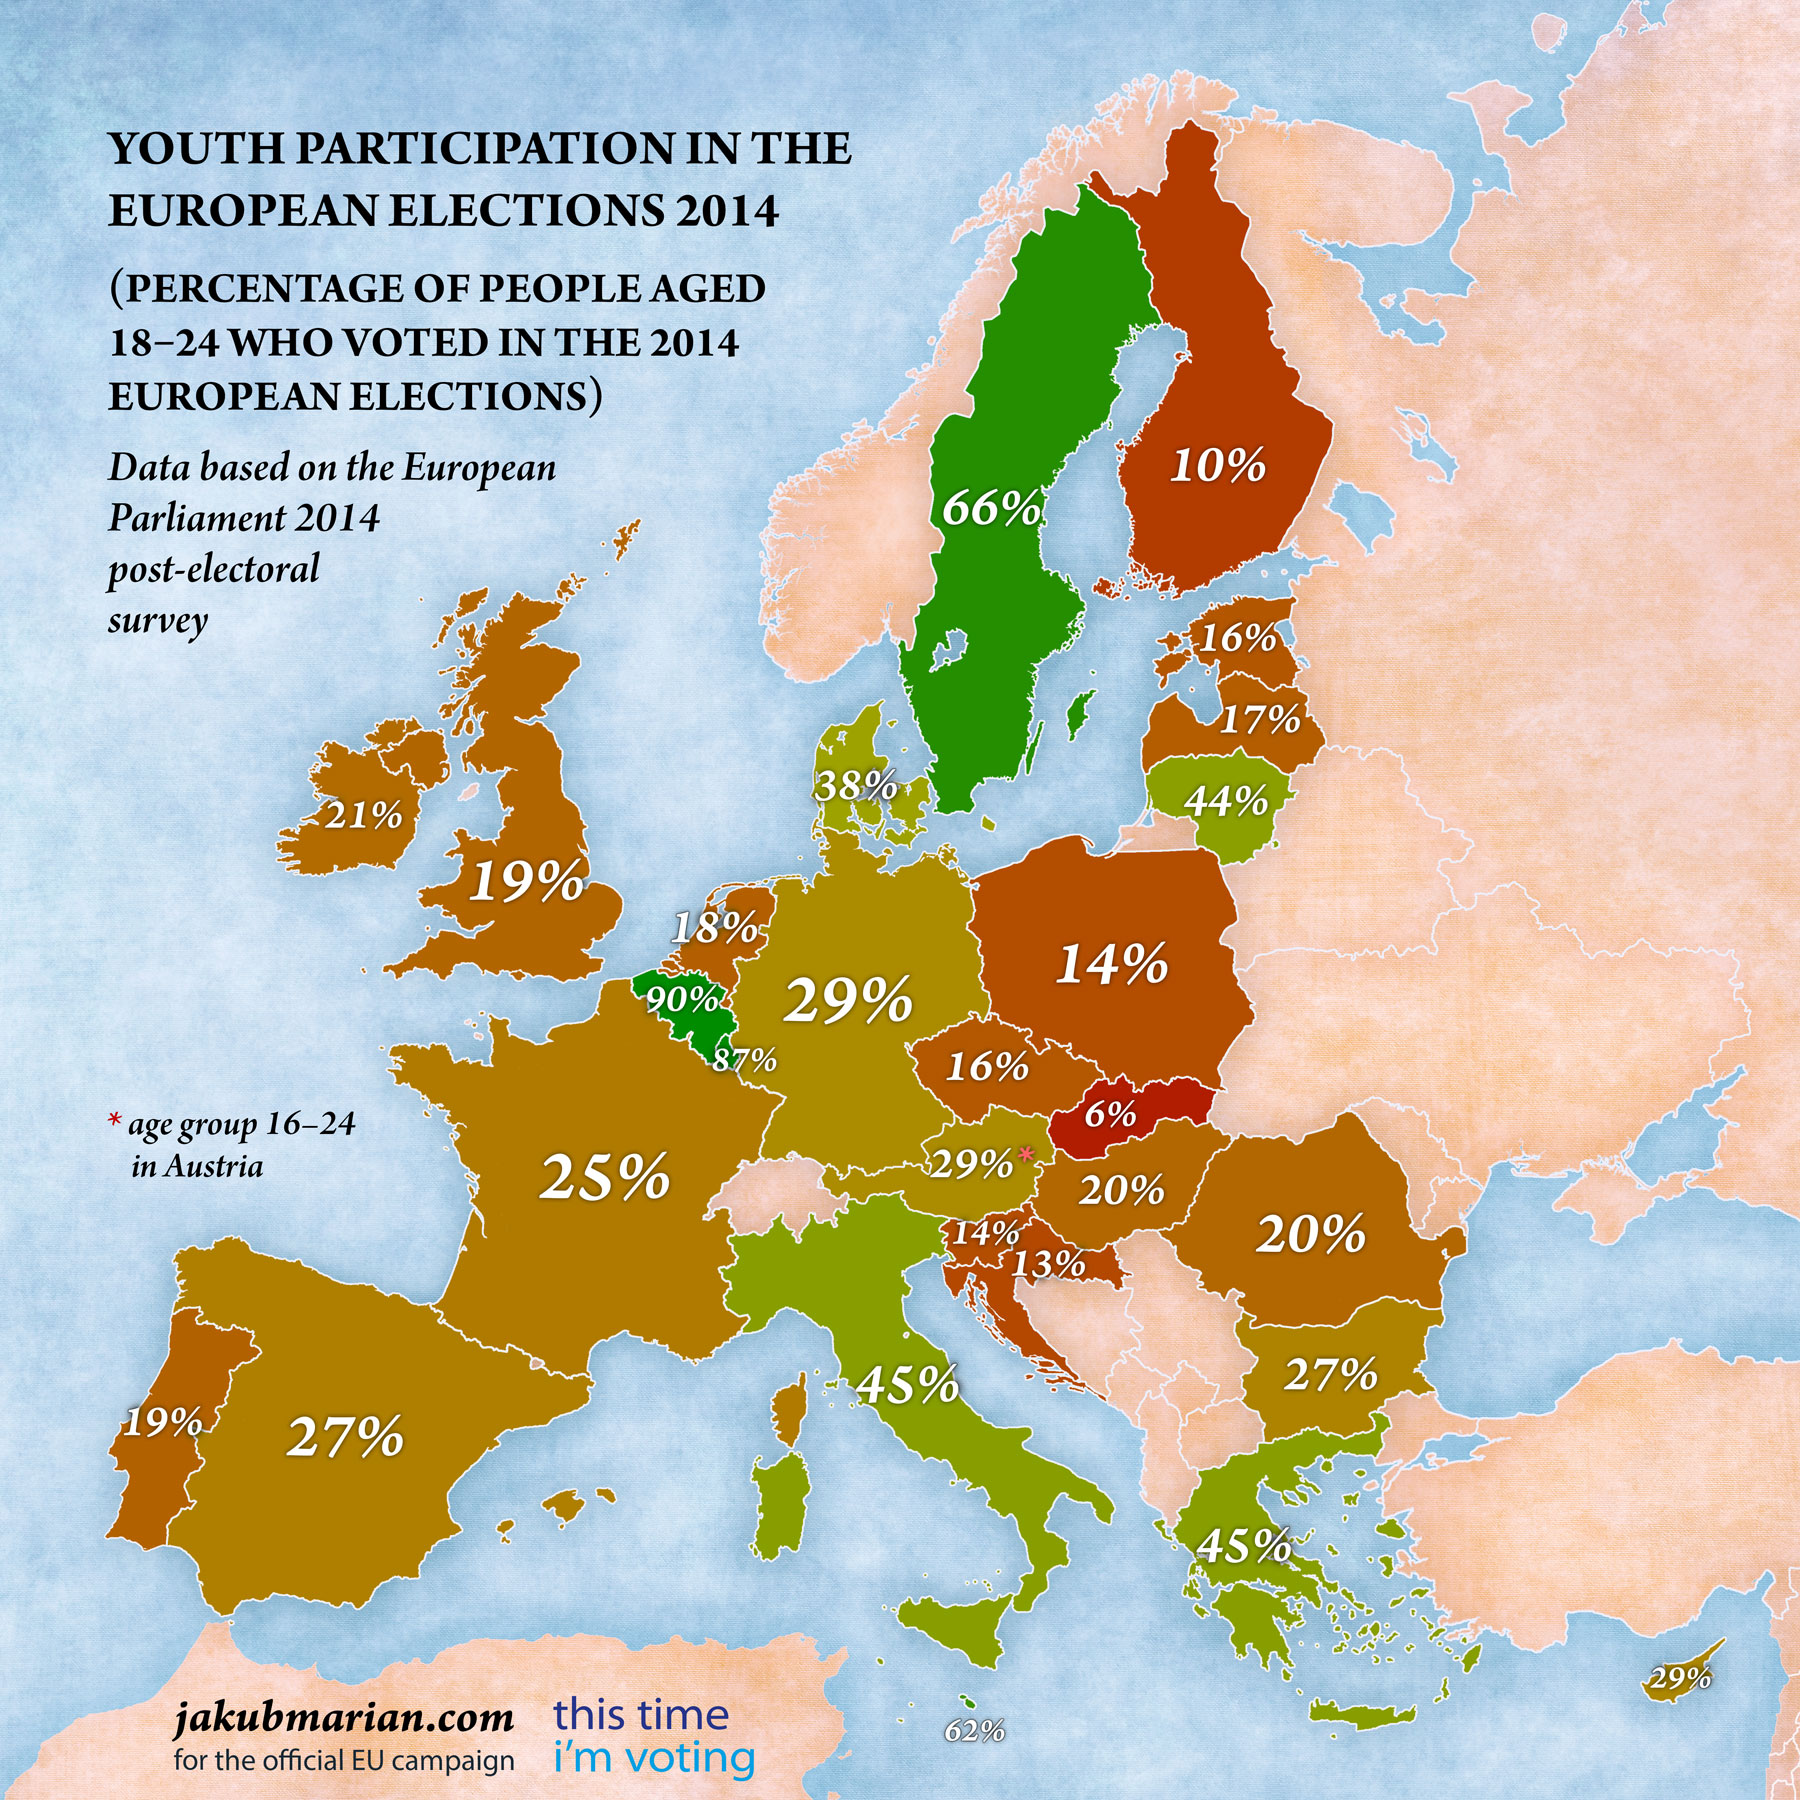 Youth participation in the 2014 European elections